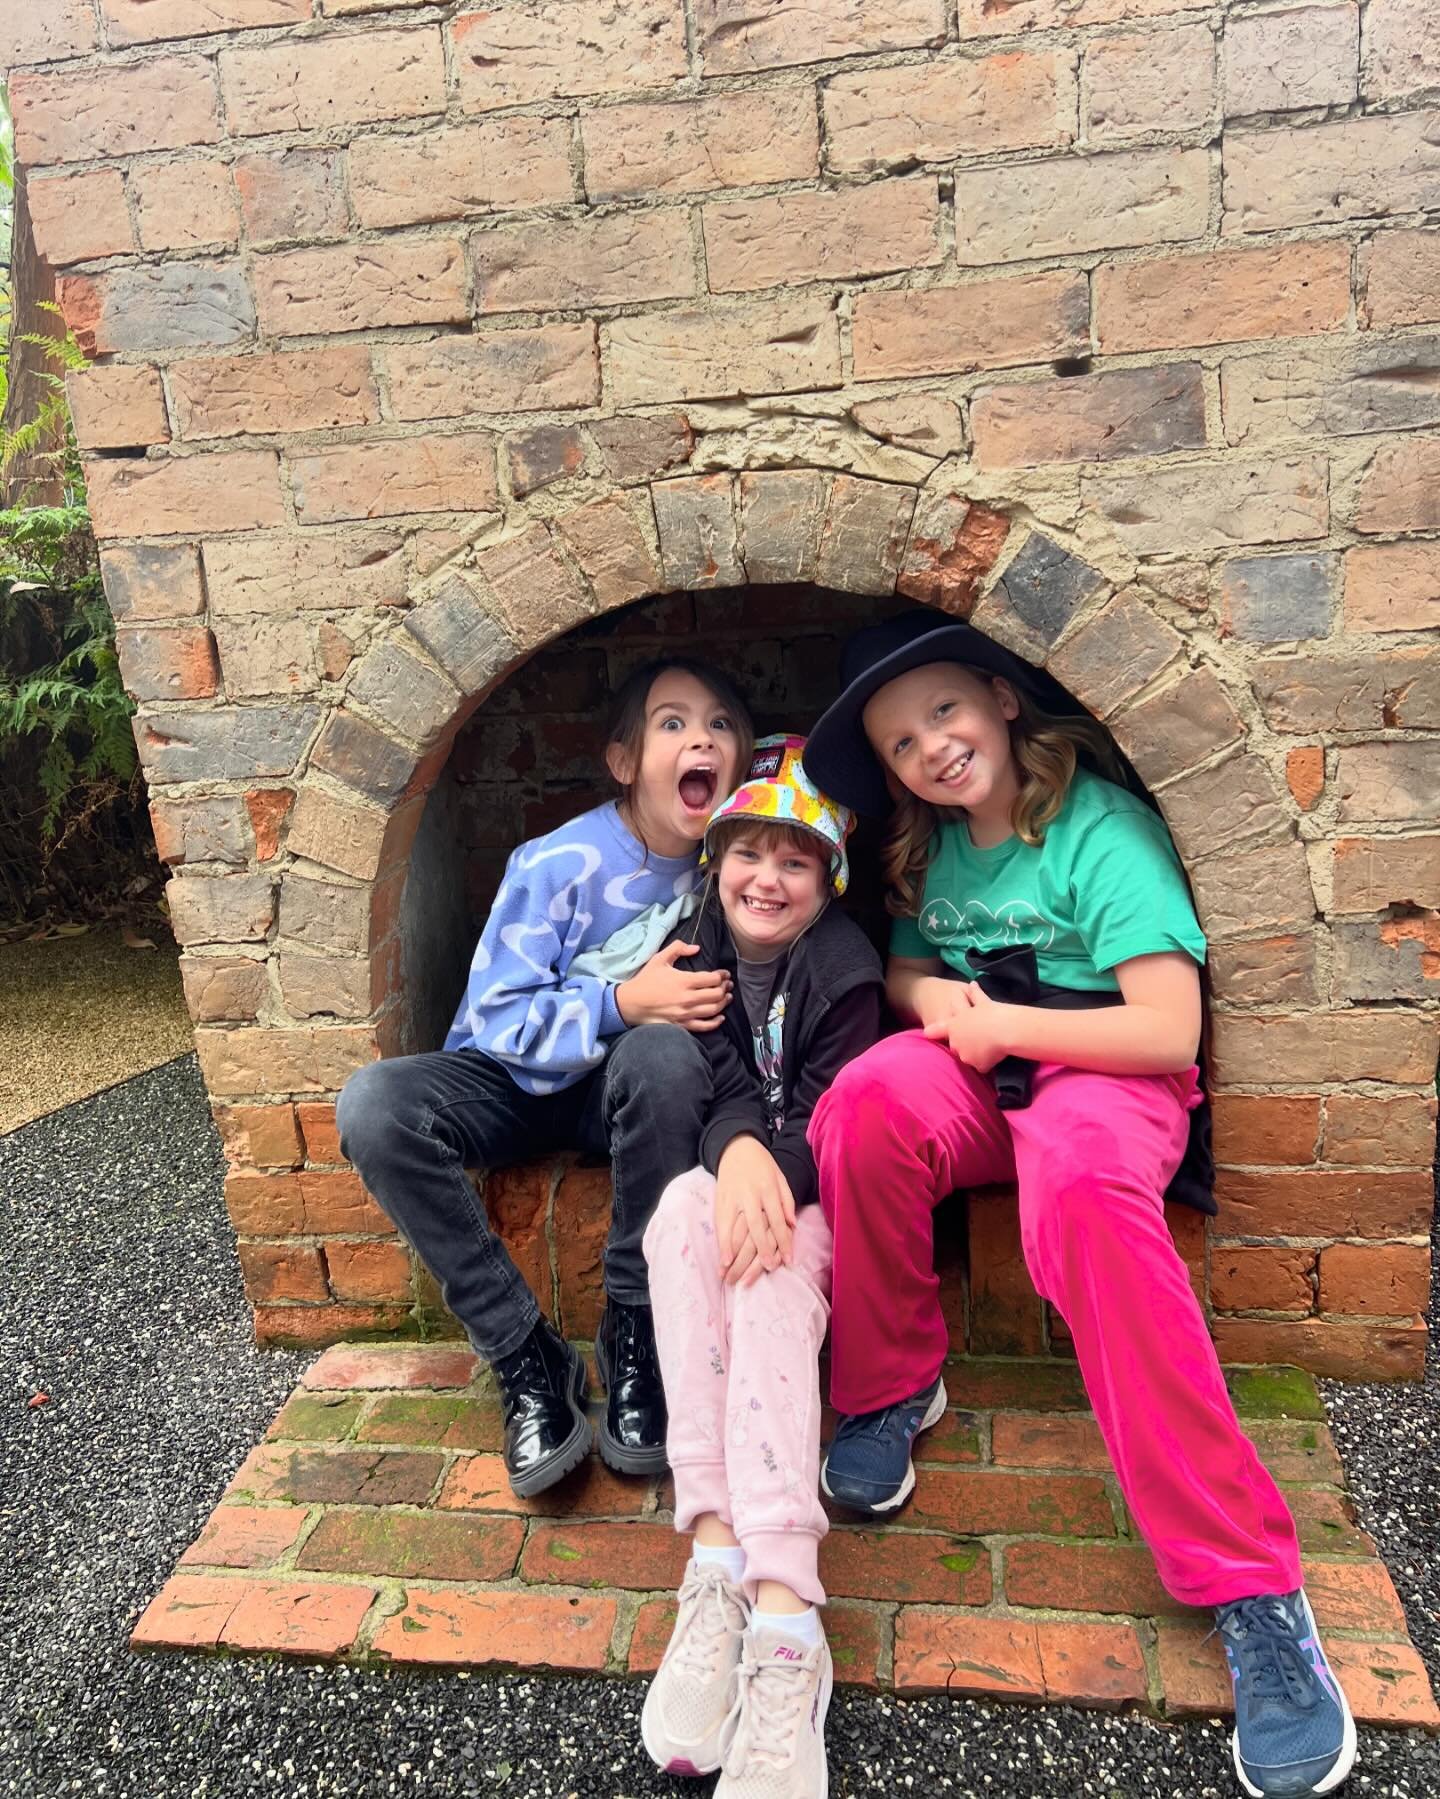 Once again the Grade 3/4 students have been busy - this time they travelled outside of the school on an excursion to Melbourne Museum. From all reports it was a fantastic adventure full of educational opportunities that will be connected back to thei